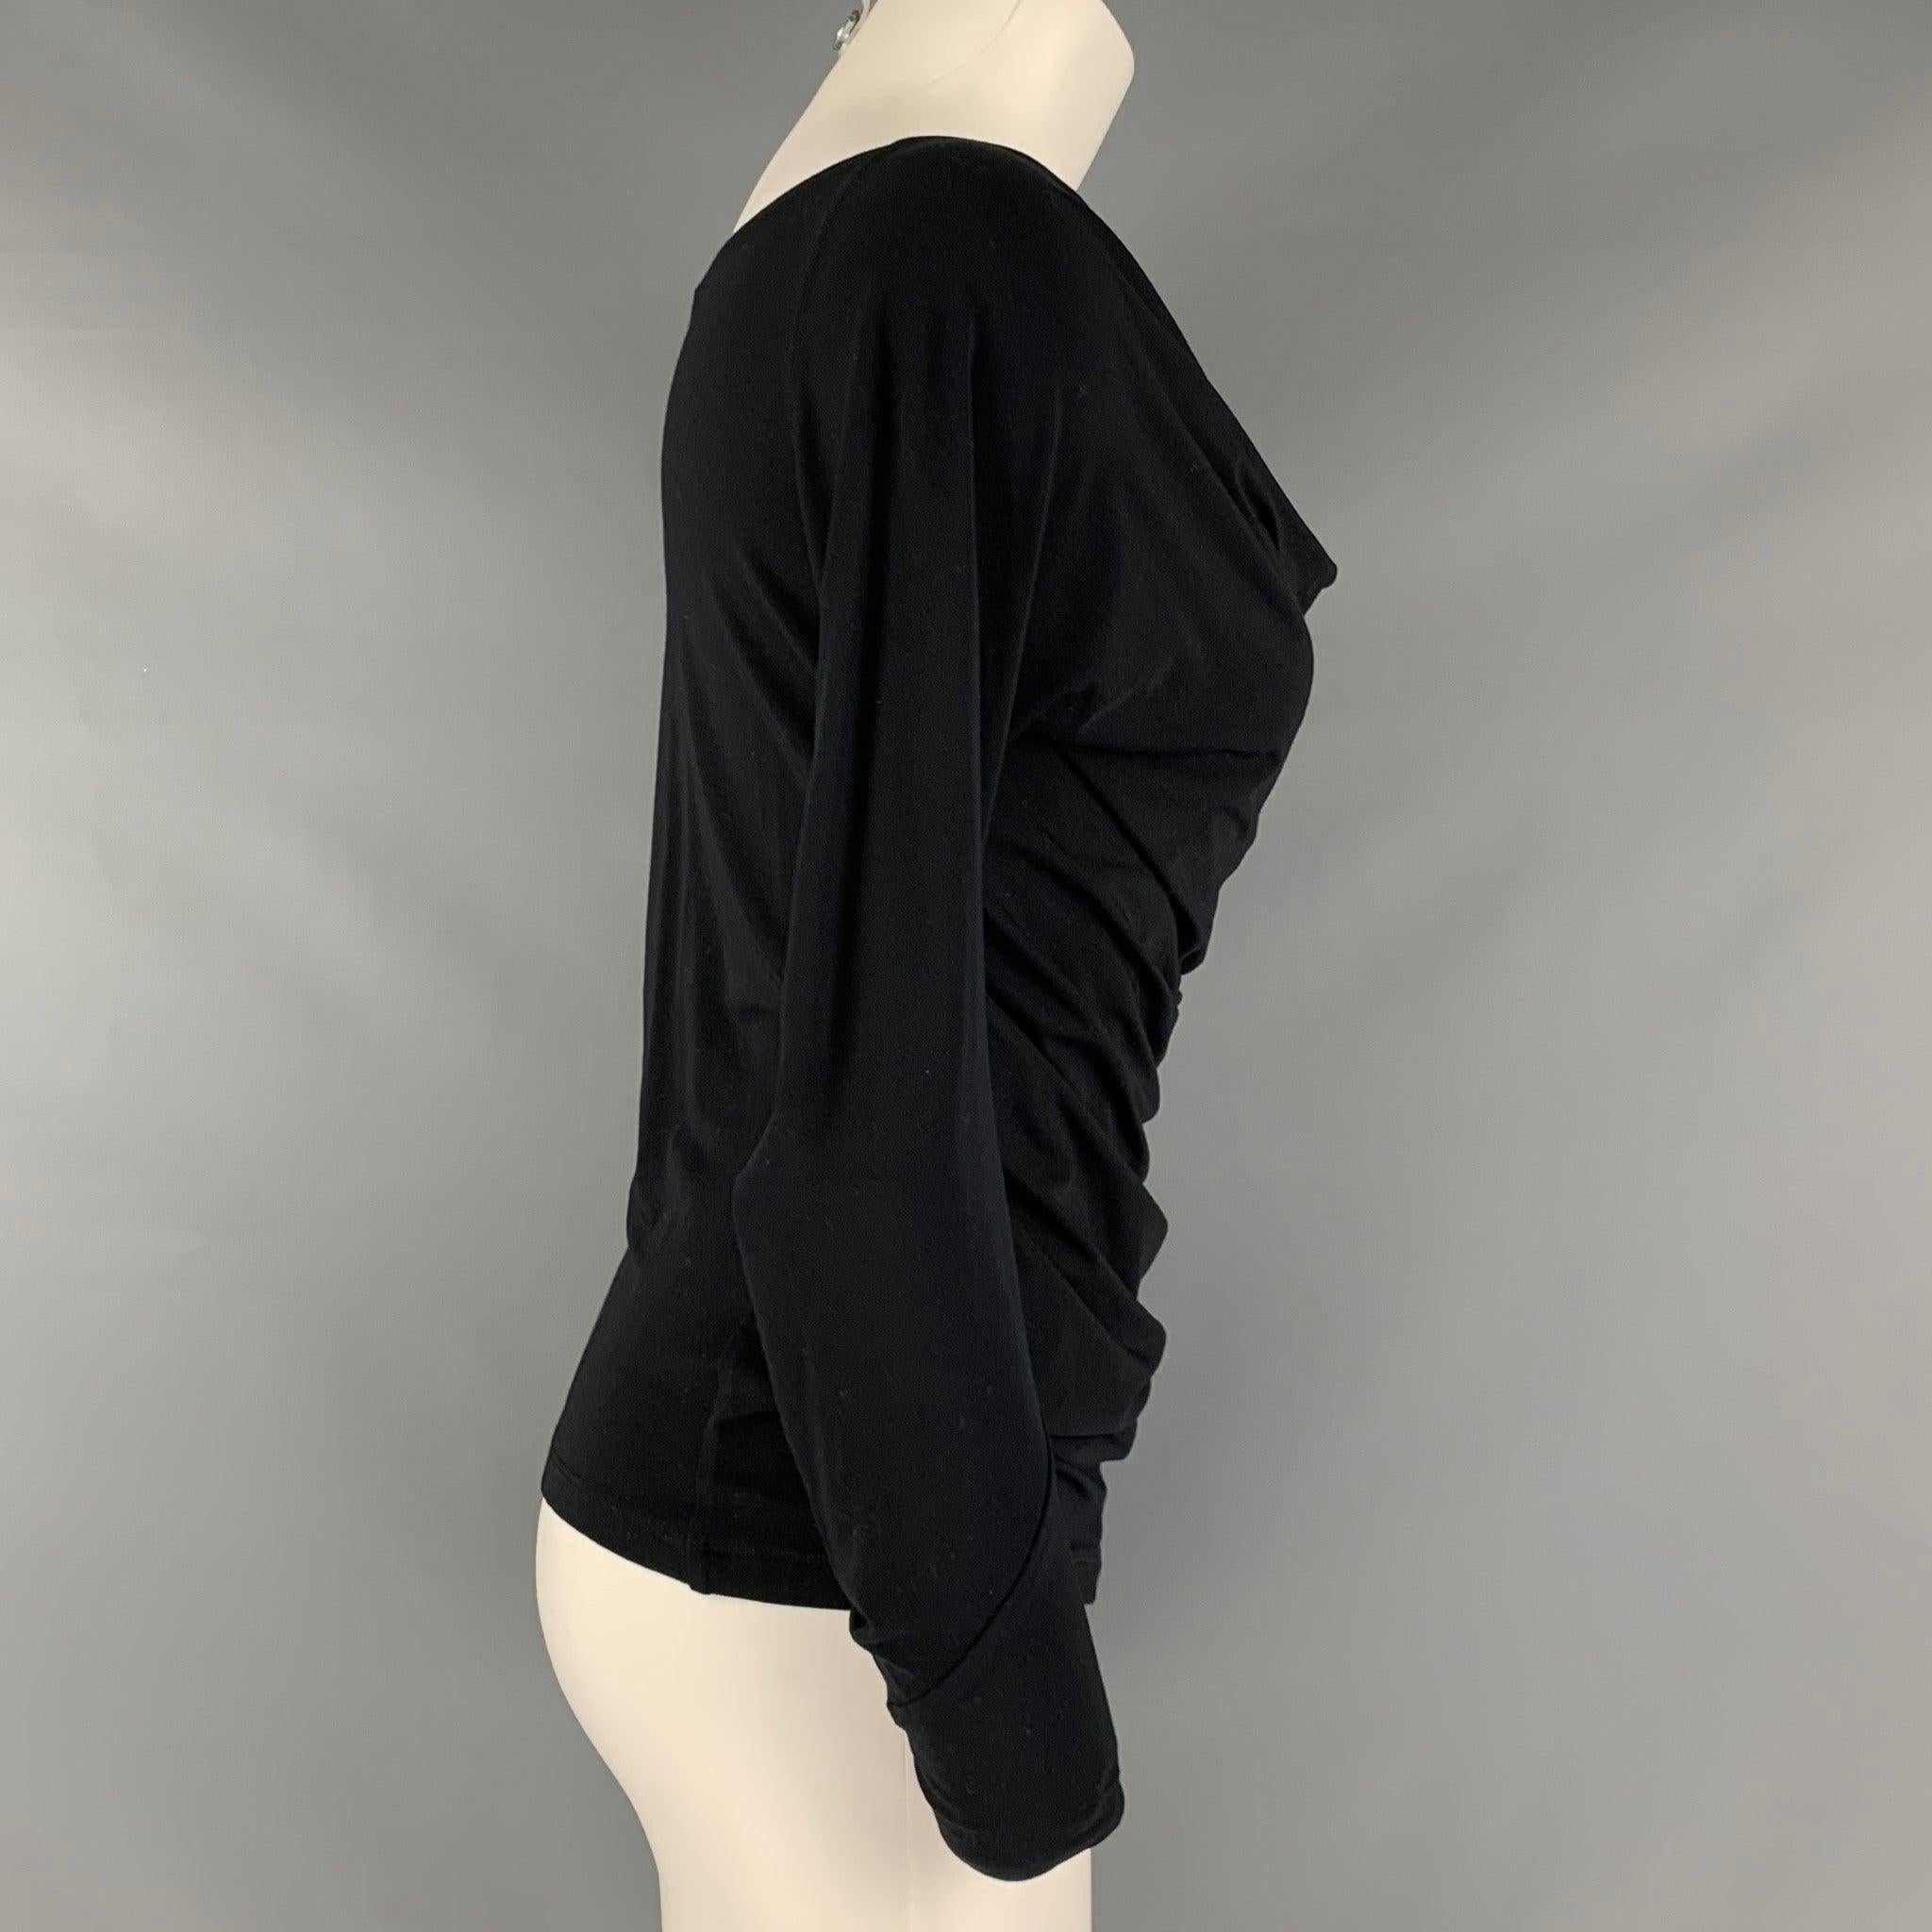 DONNA KARAN pullover comes in a black viscose and elastane knit material featuring a draped neckline, and long sleeve.Very Good Pre-Owned Condition. Moderate signs of wear. 

Marked:   S 

Measurements: 
 
Shoulder: 18 inches Bust: 39 inches Sleeve: